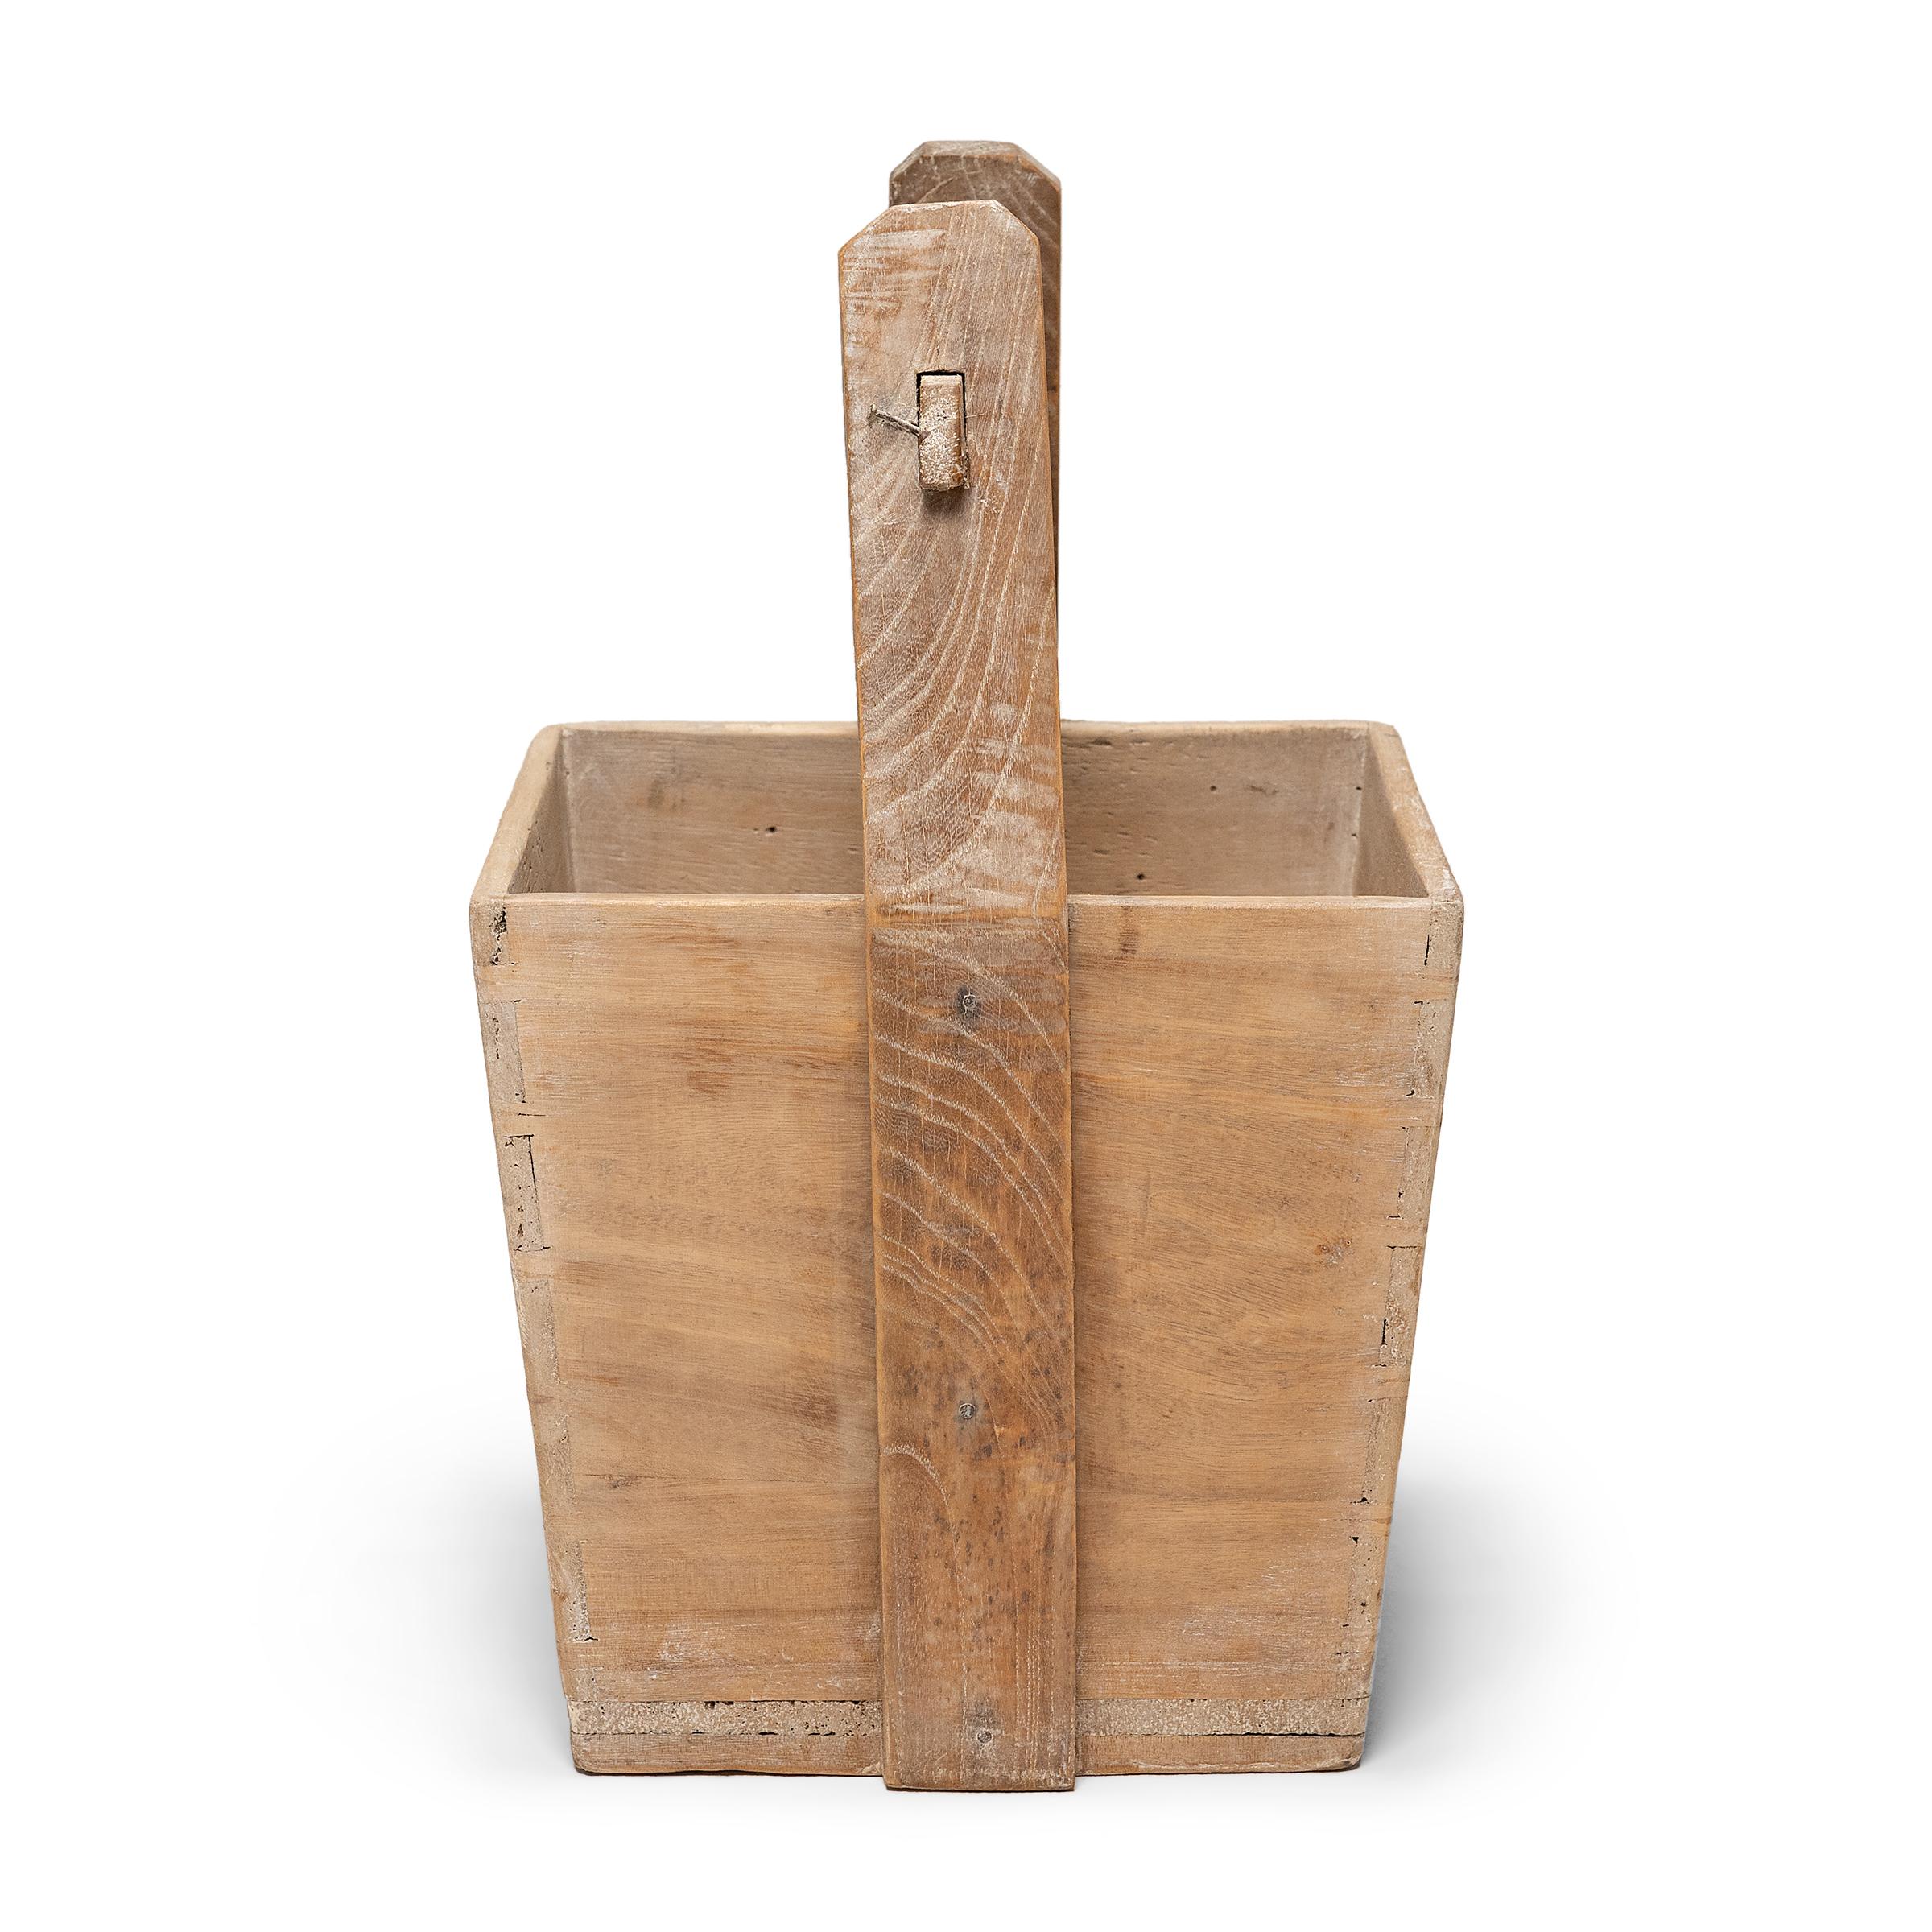 Rustic Chinese Grain Storage Container, c. 1850 For Sale